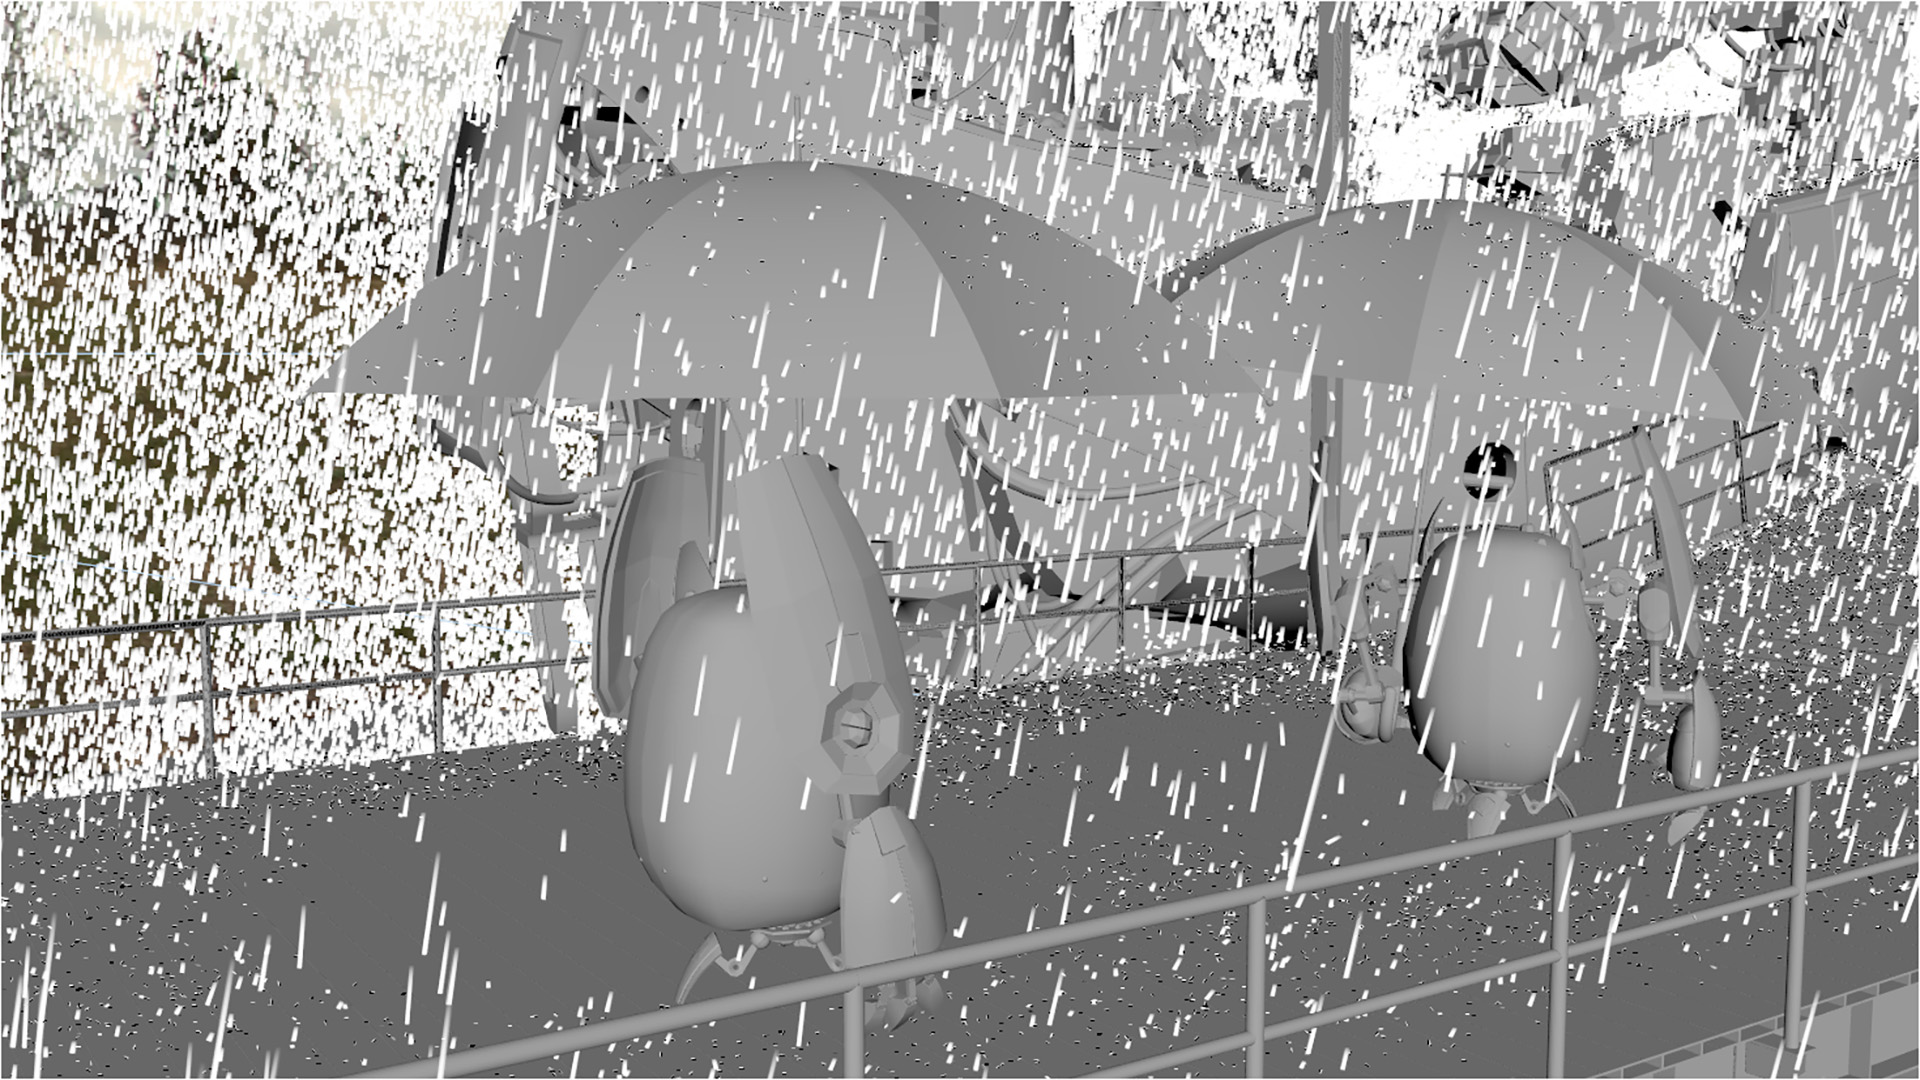 Figure 39: Closeup of a work-in-progress version of the rain sim. Note how the umbrellas properly block rain from falling on the robots under the umbrellas.